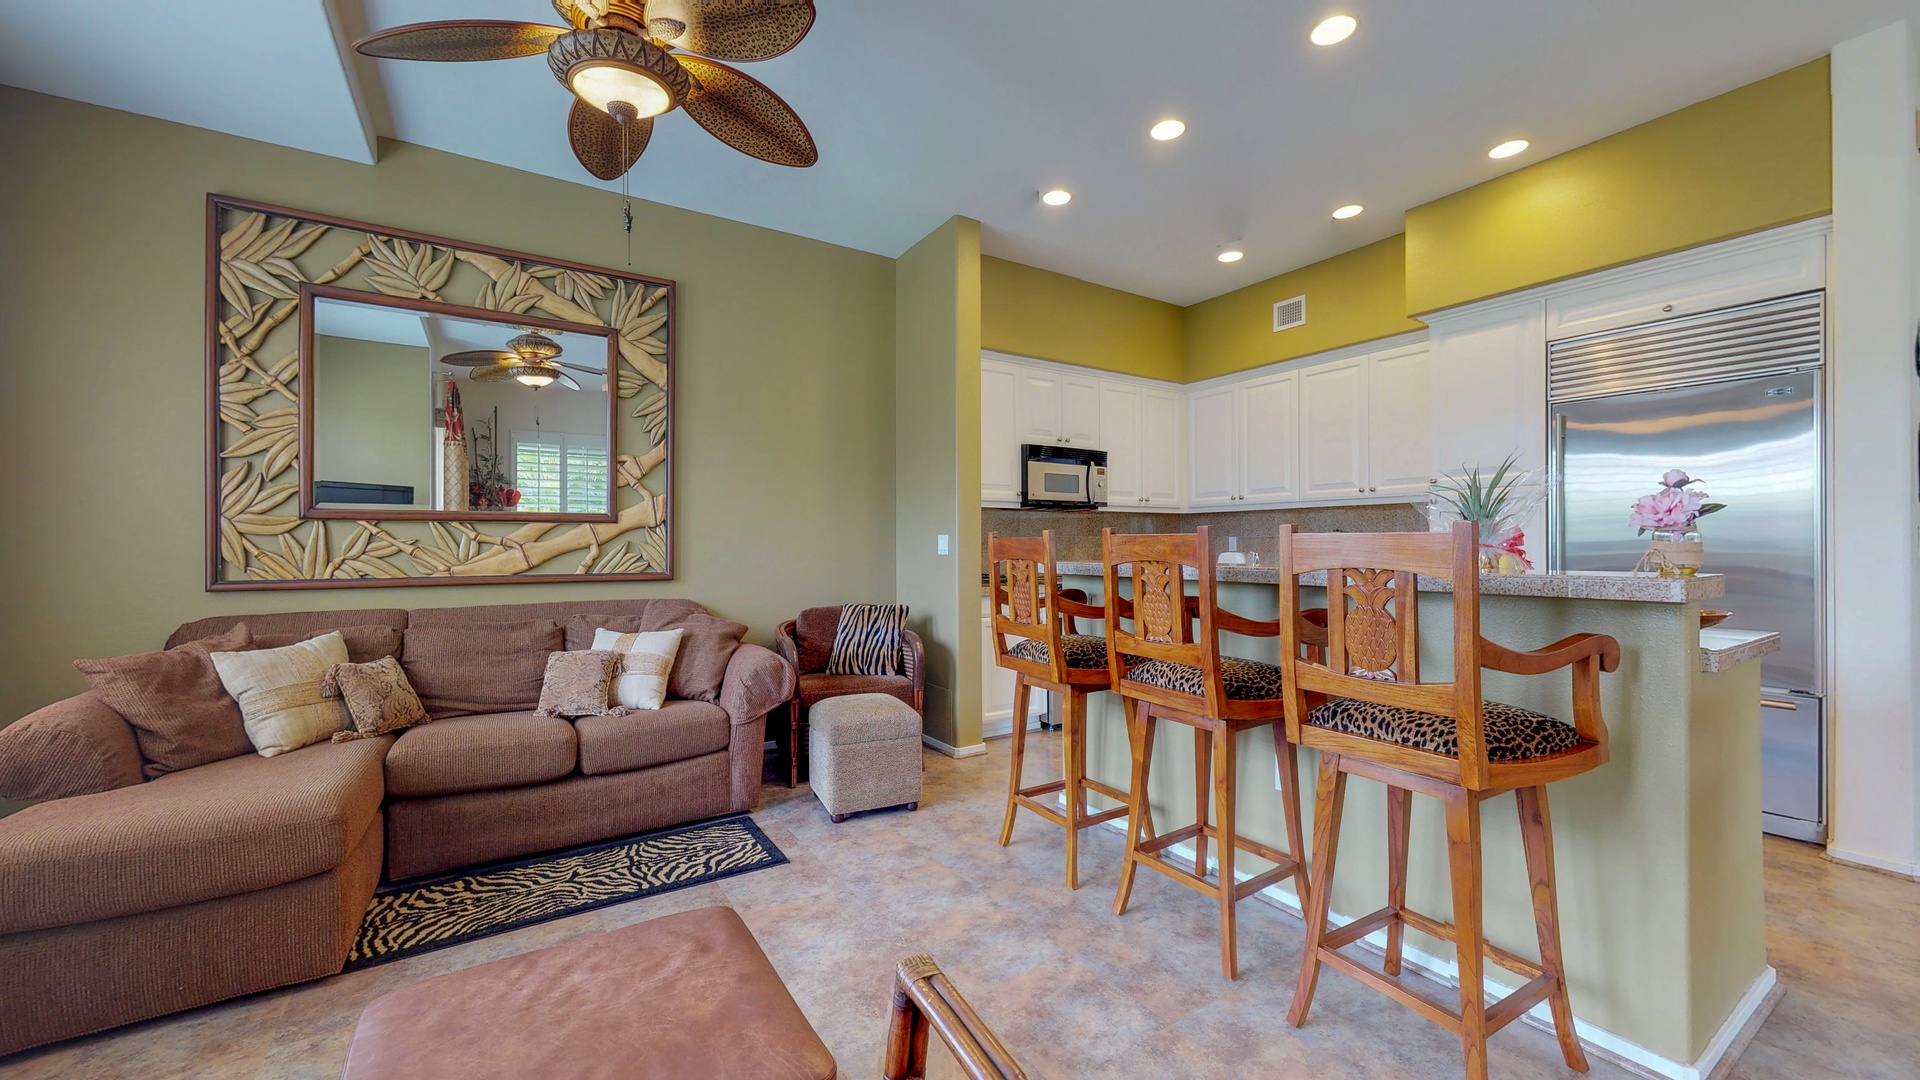 Kapolei Vacation Rentals, Coconut Plantation 1080-1 - Seamless living in the condo with generous accommodations for everyone.